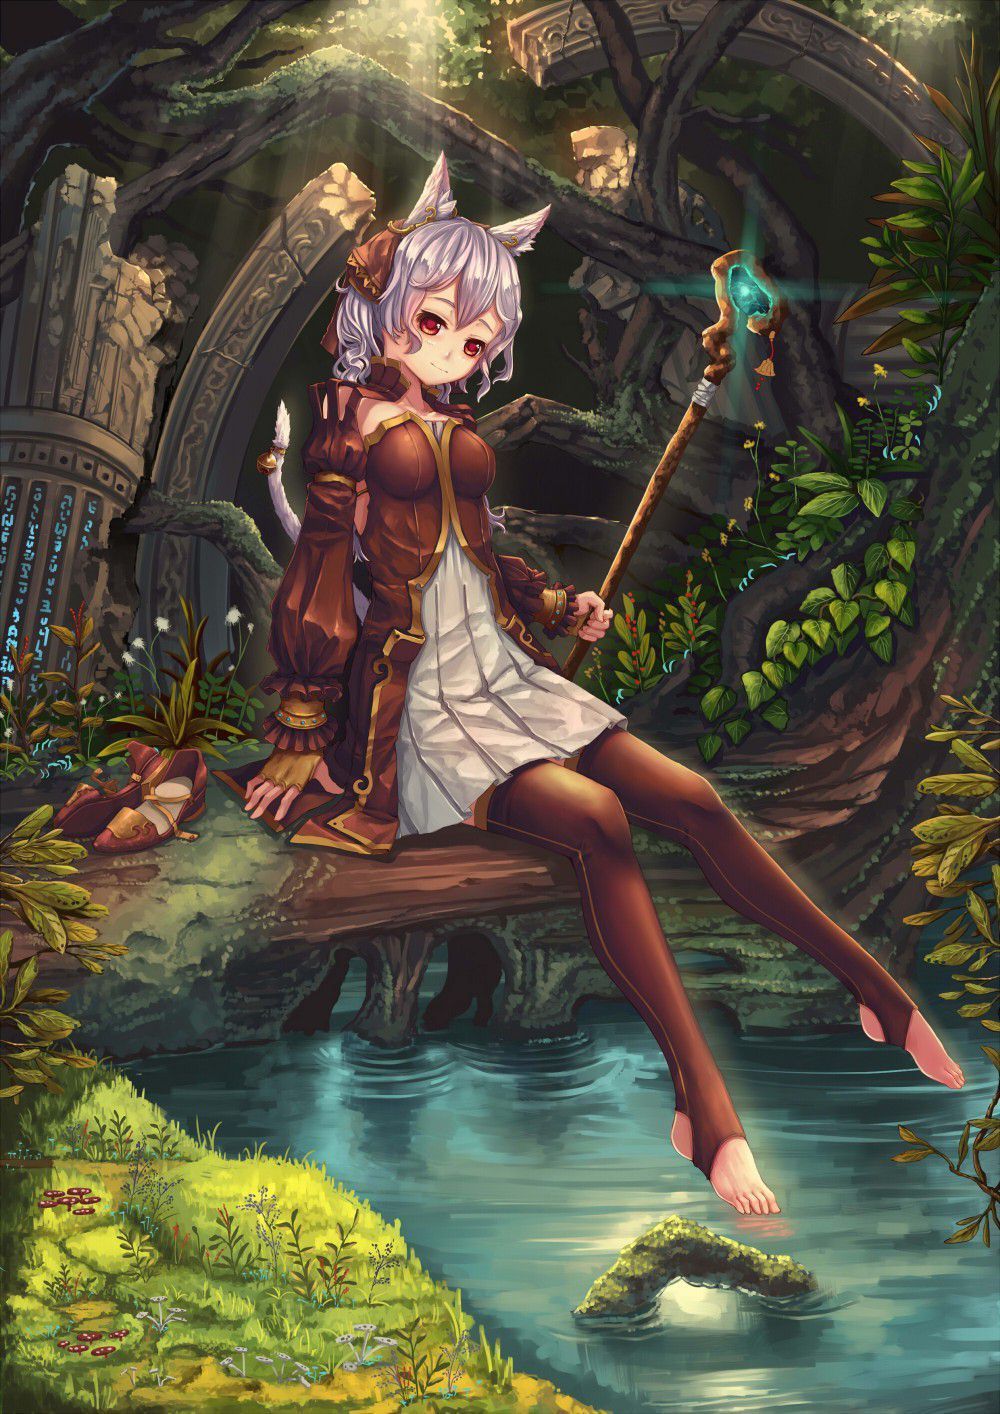 Secondary image of girl with animal ears 20